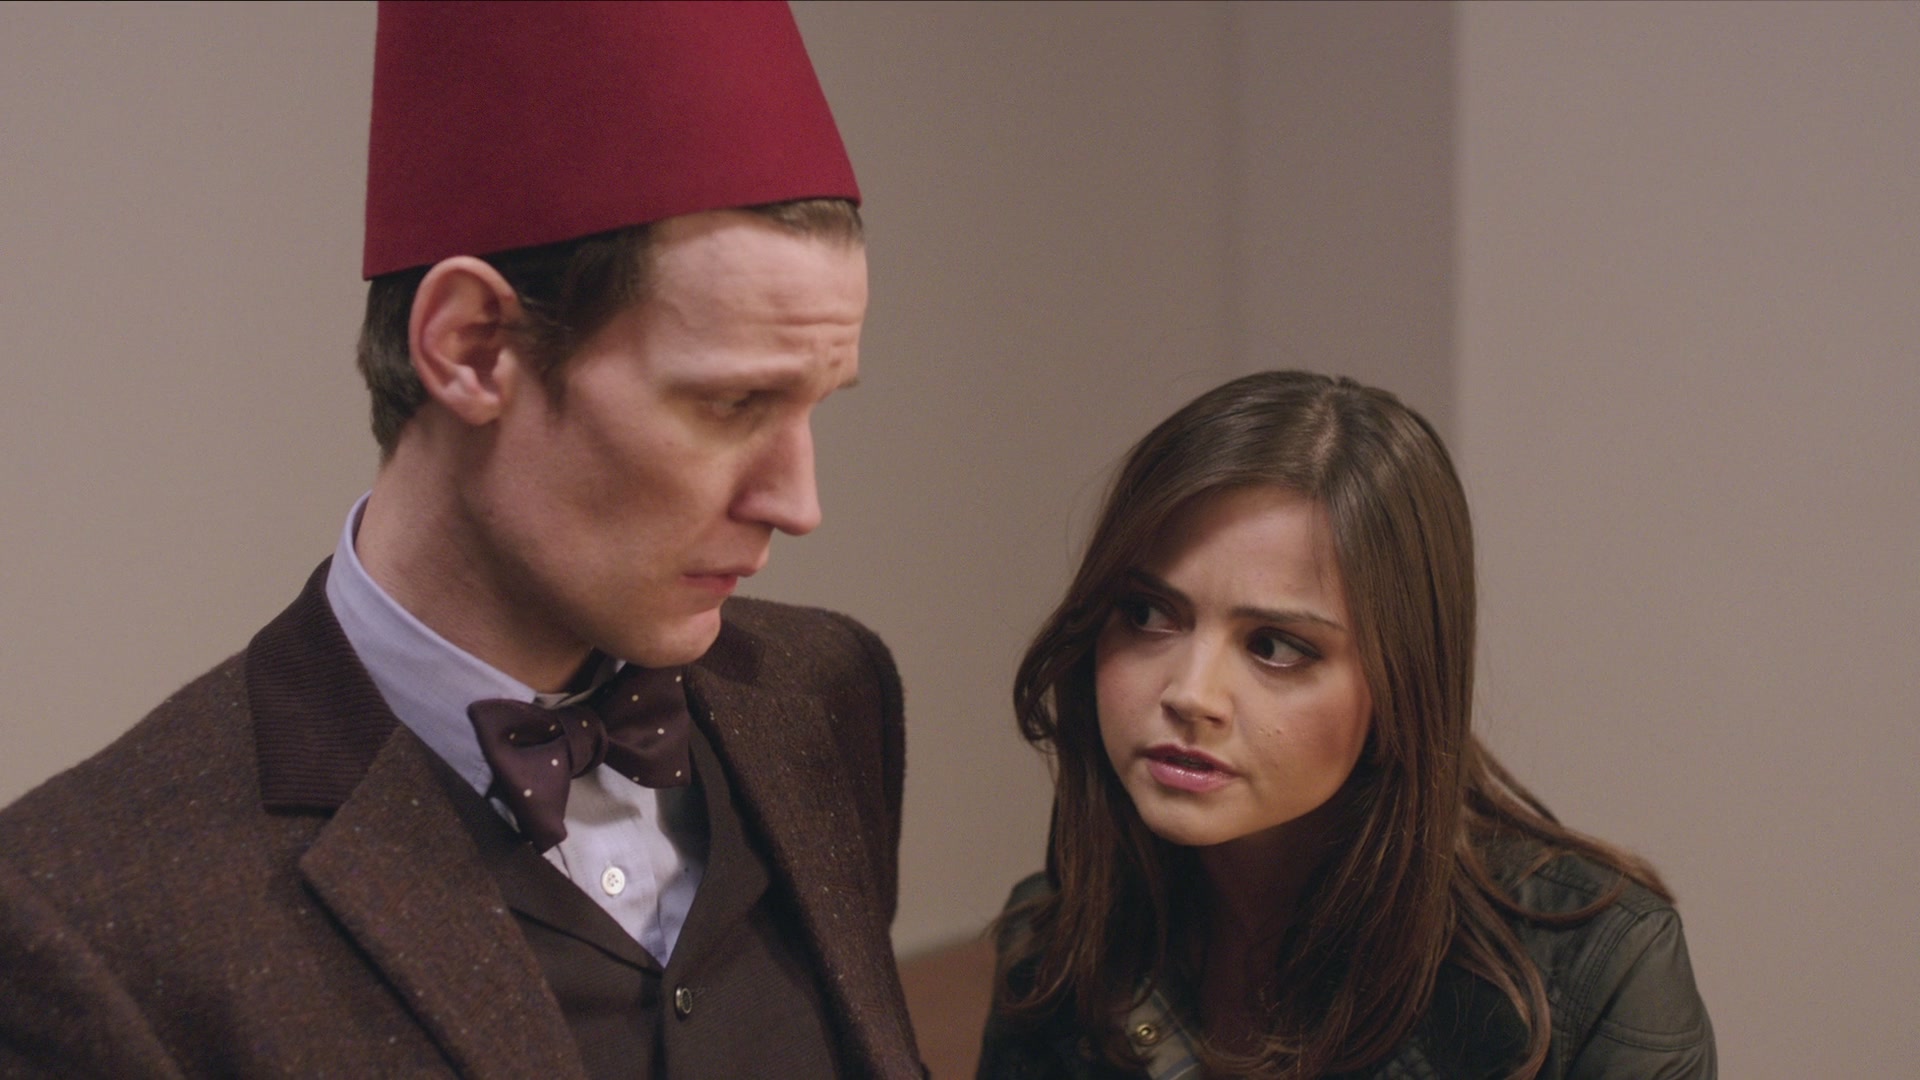 DayOfTheDoctor-Caps-0413.jpg